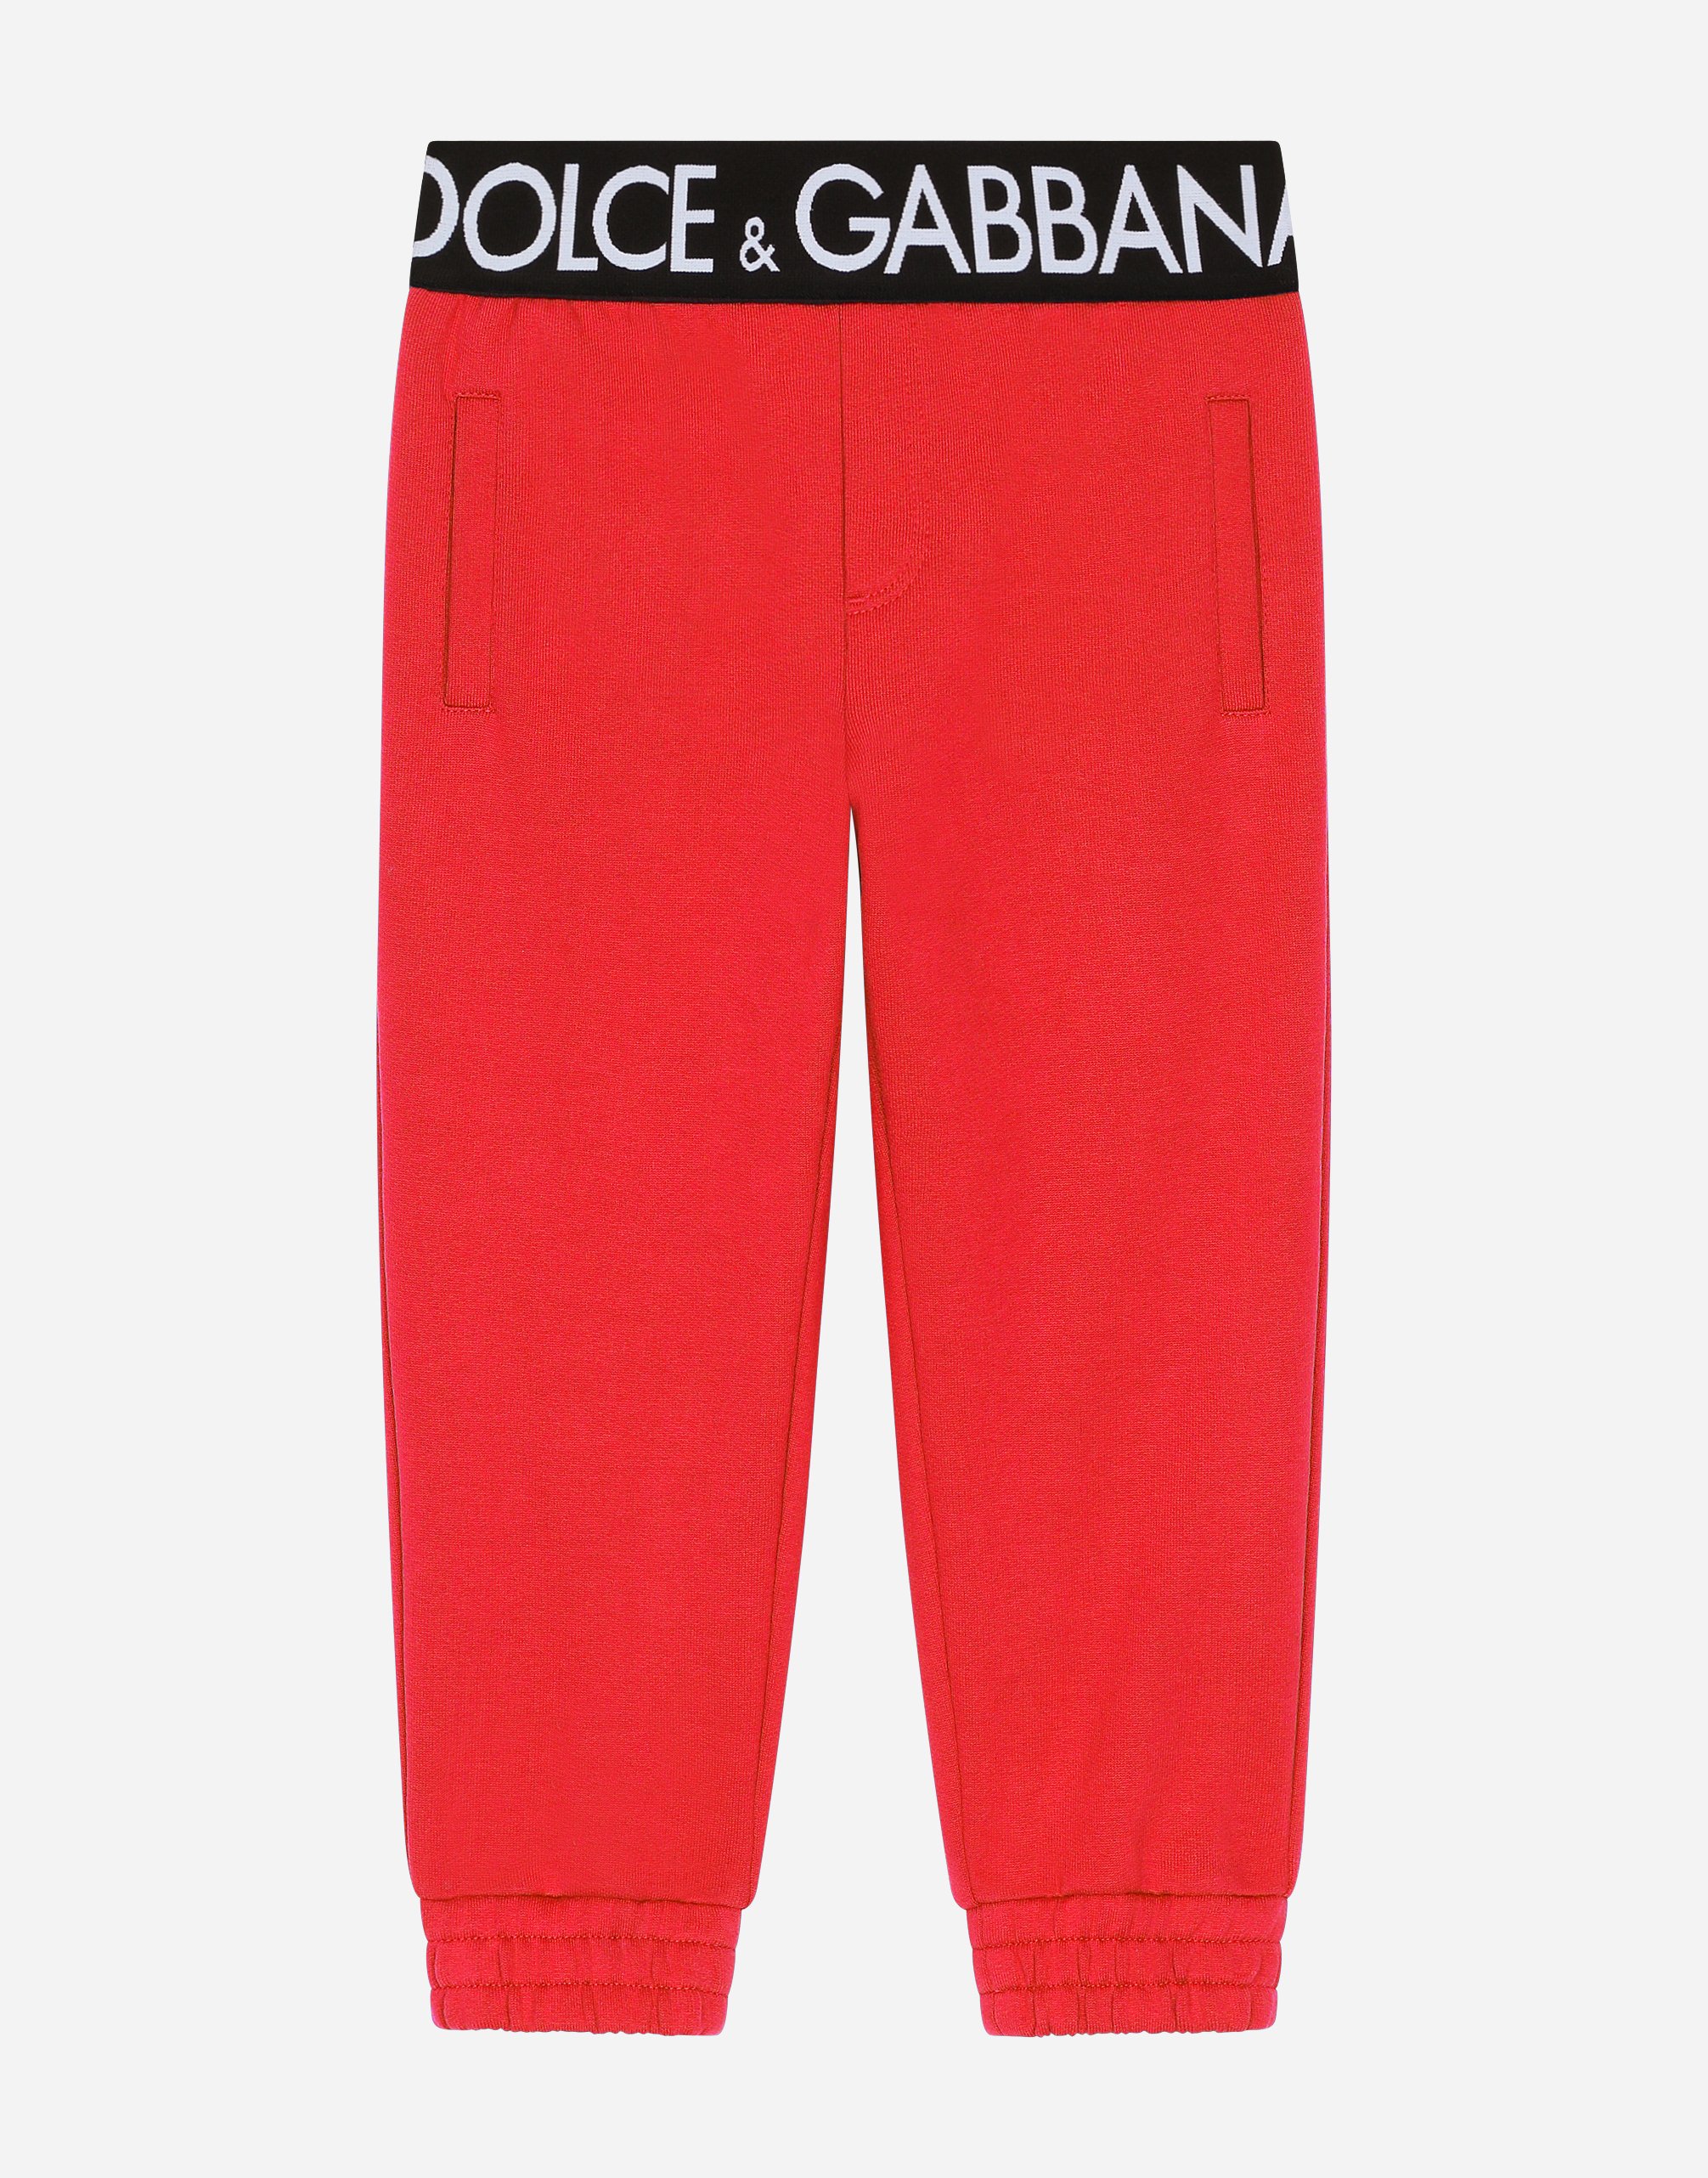 Dolce & Gabbana Kids' Jersey Jogging Trousers With Branded Elastic In Red